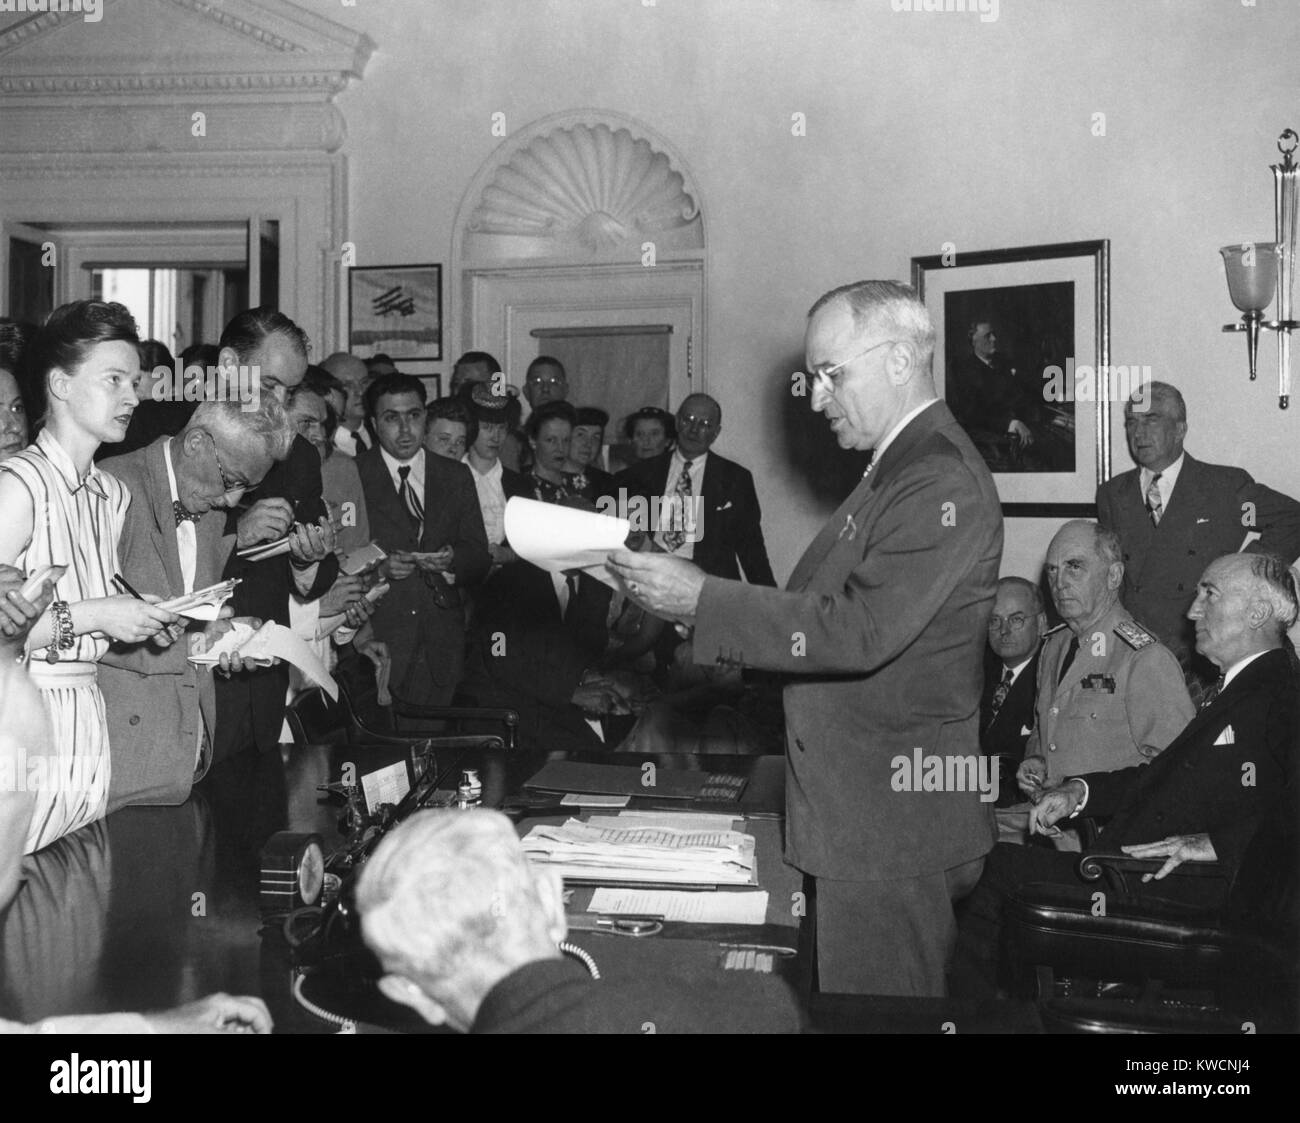 President Harry Truman announcing Japan's surrender to reporters in the Oval Office. Seated behind President Truman are John Snyder, Treasury Sec.; Adm. William Leahy; and Sec. of State James Byrnes. August 14, 1945. - (BSLOC 2014 15 19) Stock Photo